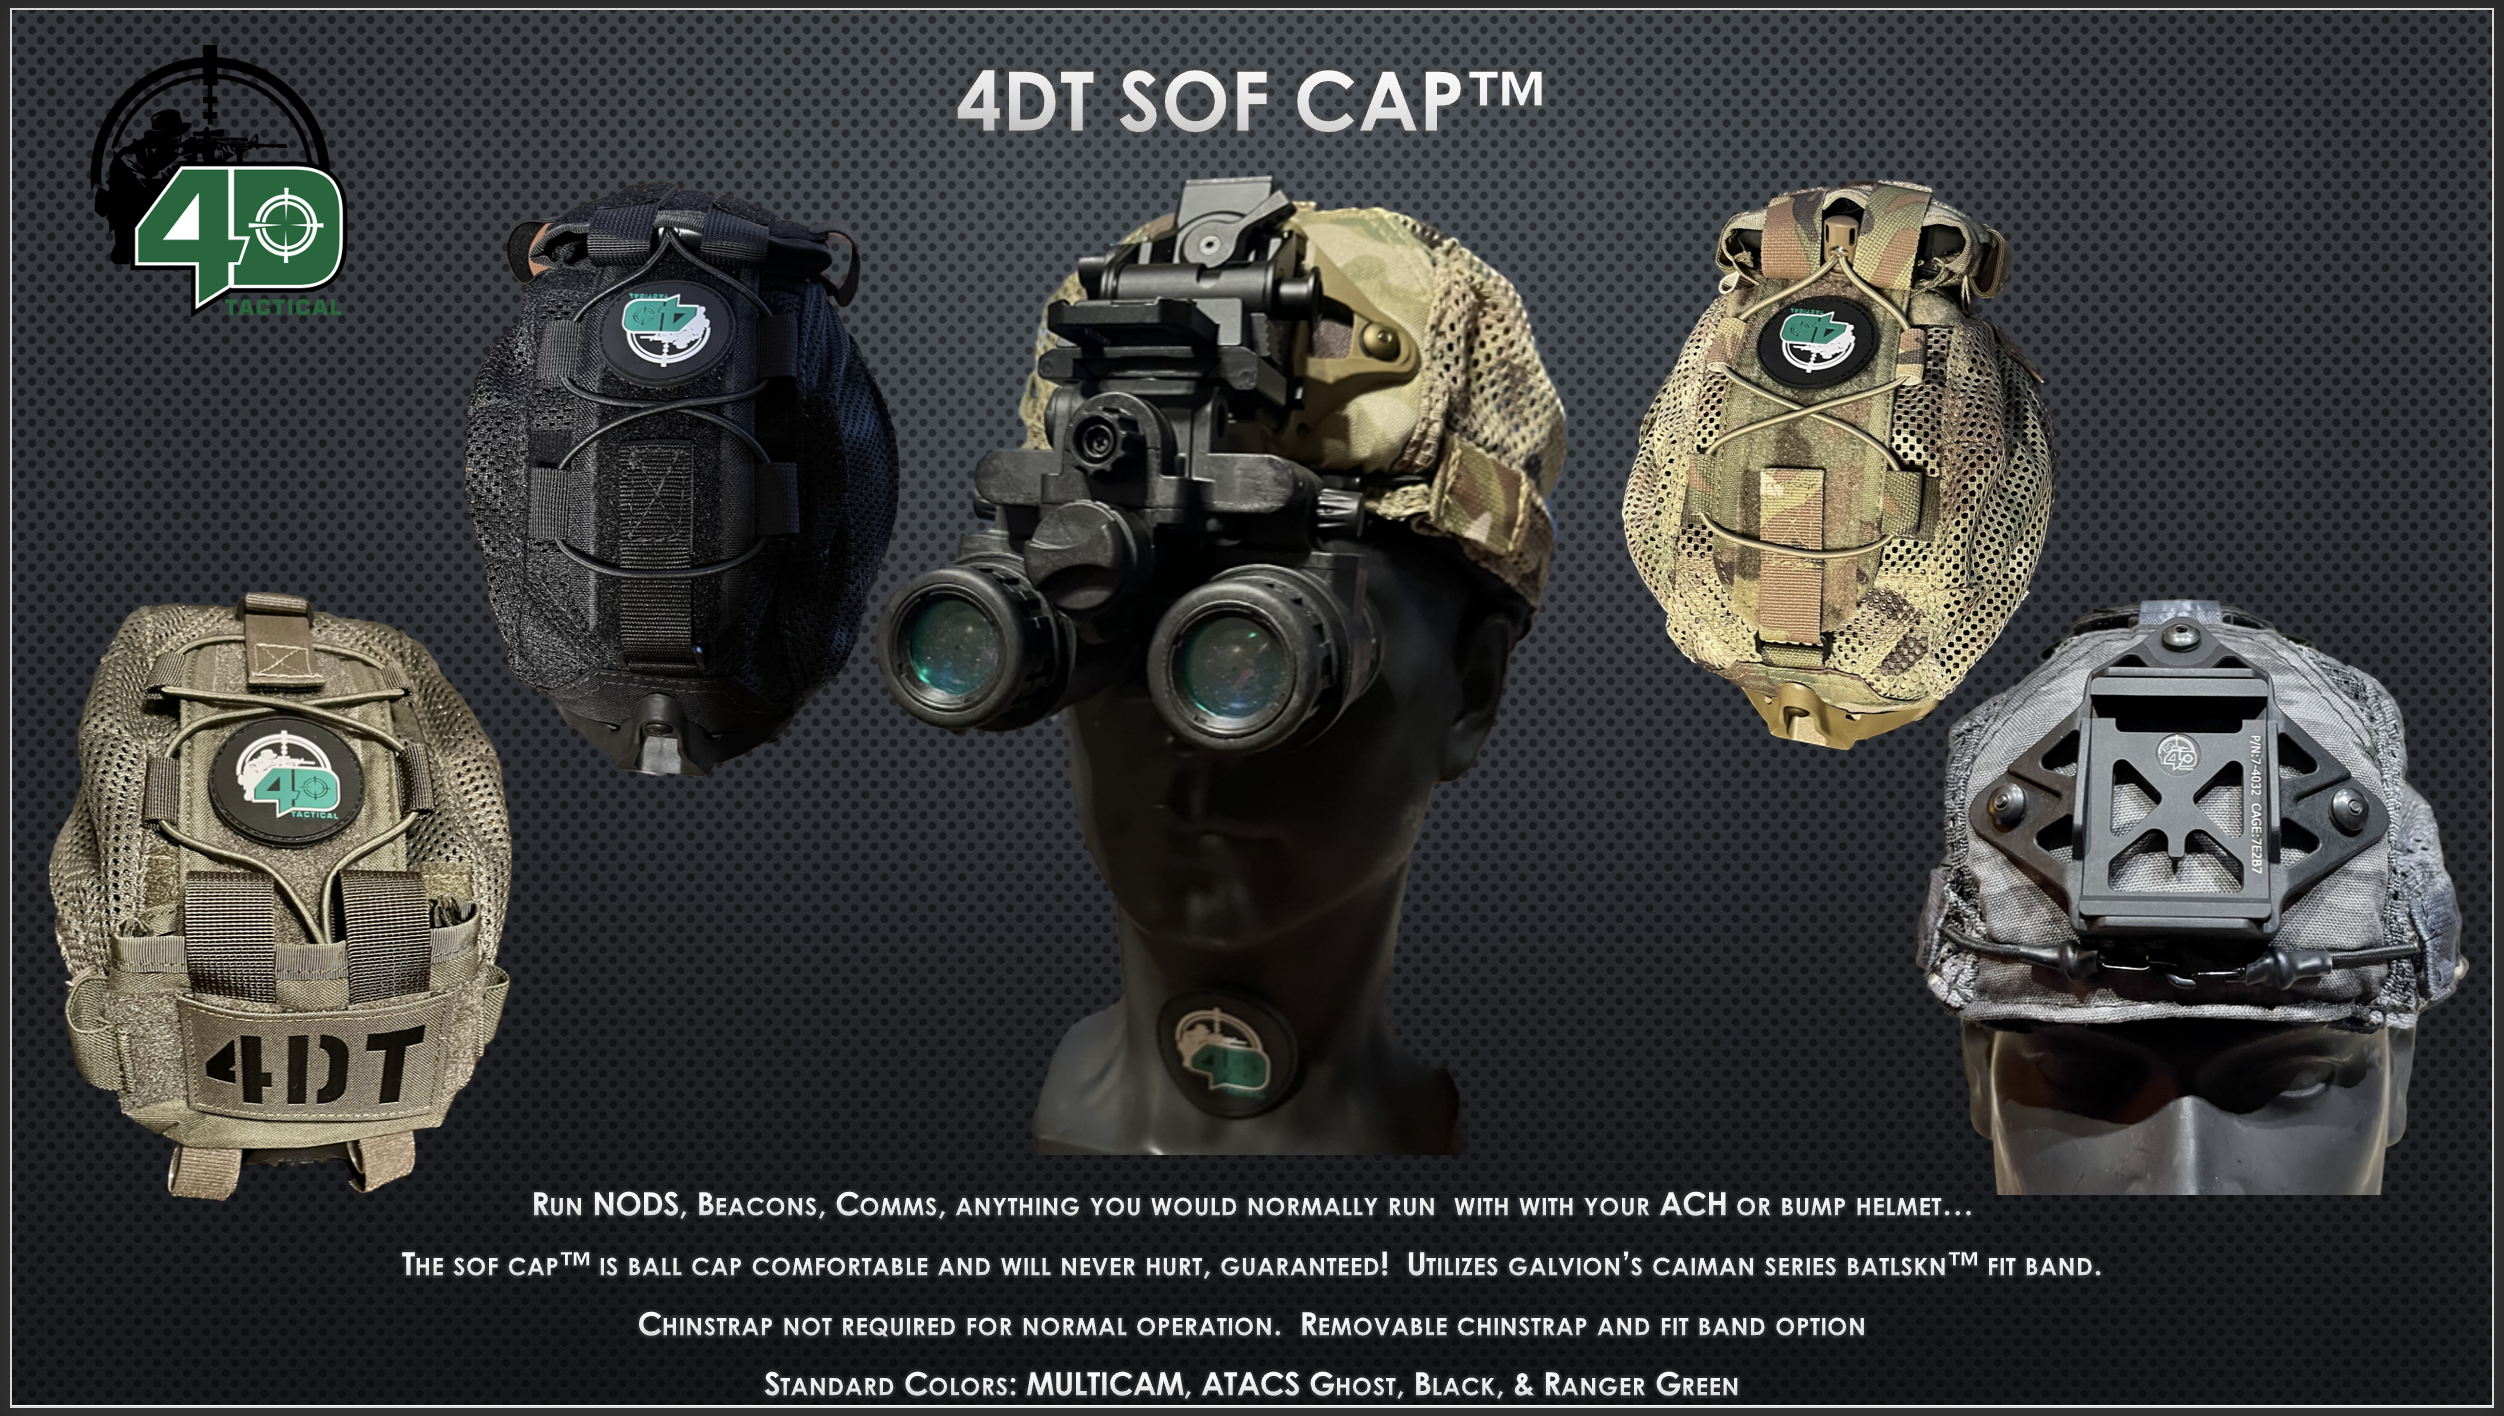 Raptor Tactical Nalgene Bottle Cover Prototypes - Soldier Systems Daily